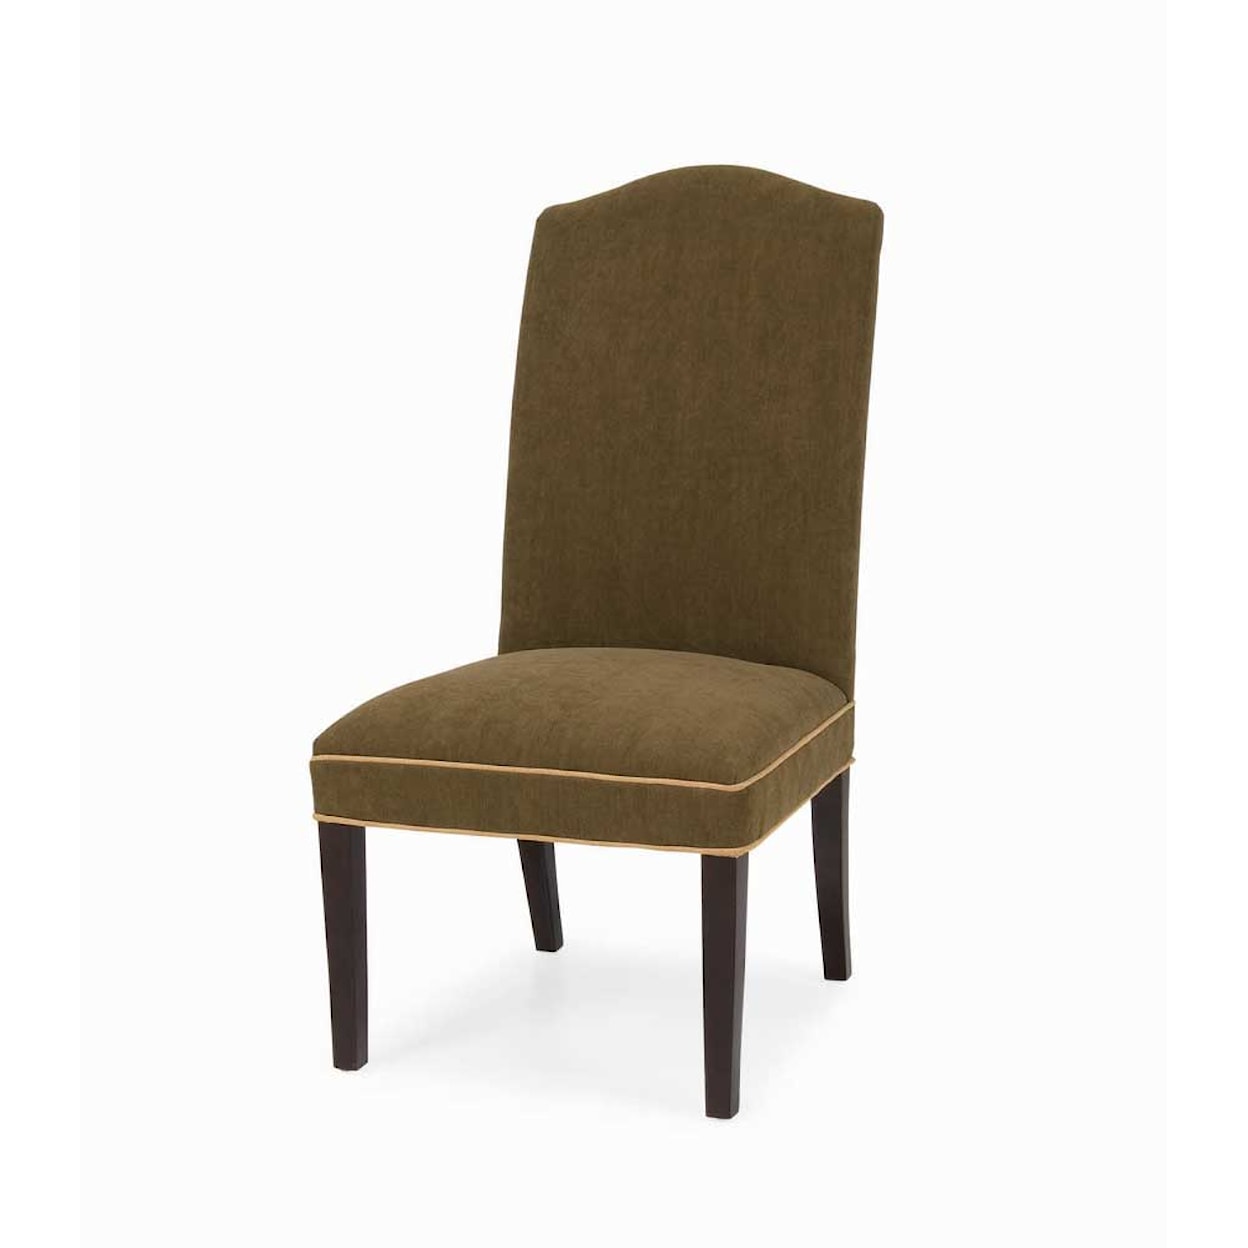 C.R. Laine Dolce Dolce Dining Chair